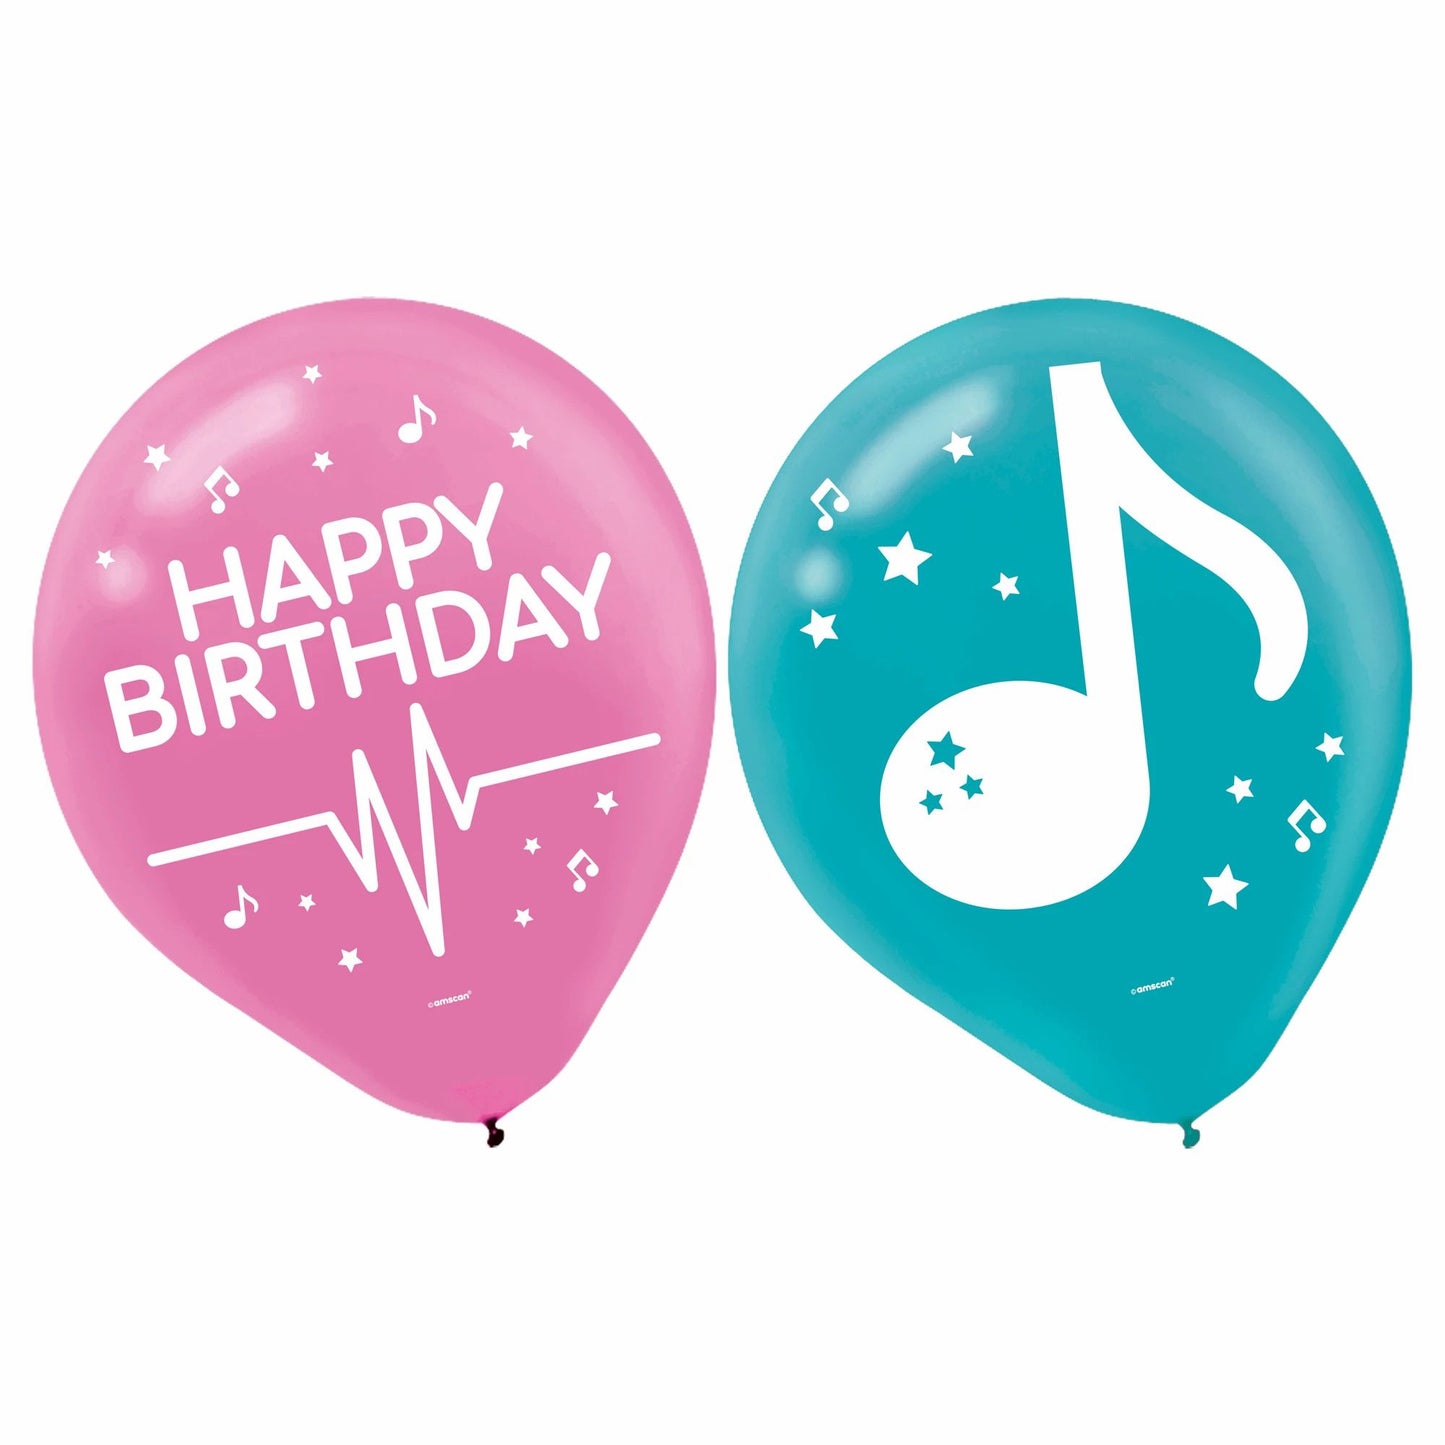 Internet Famous Viral Pink and Light Blue Music Note 12in Latex Balloons, 6ct.